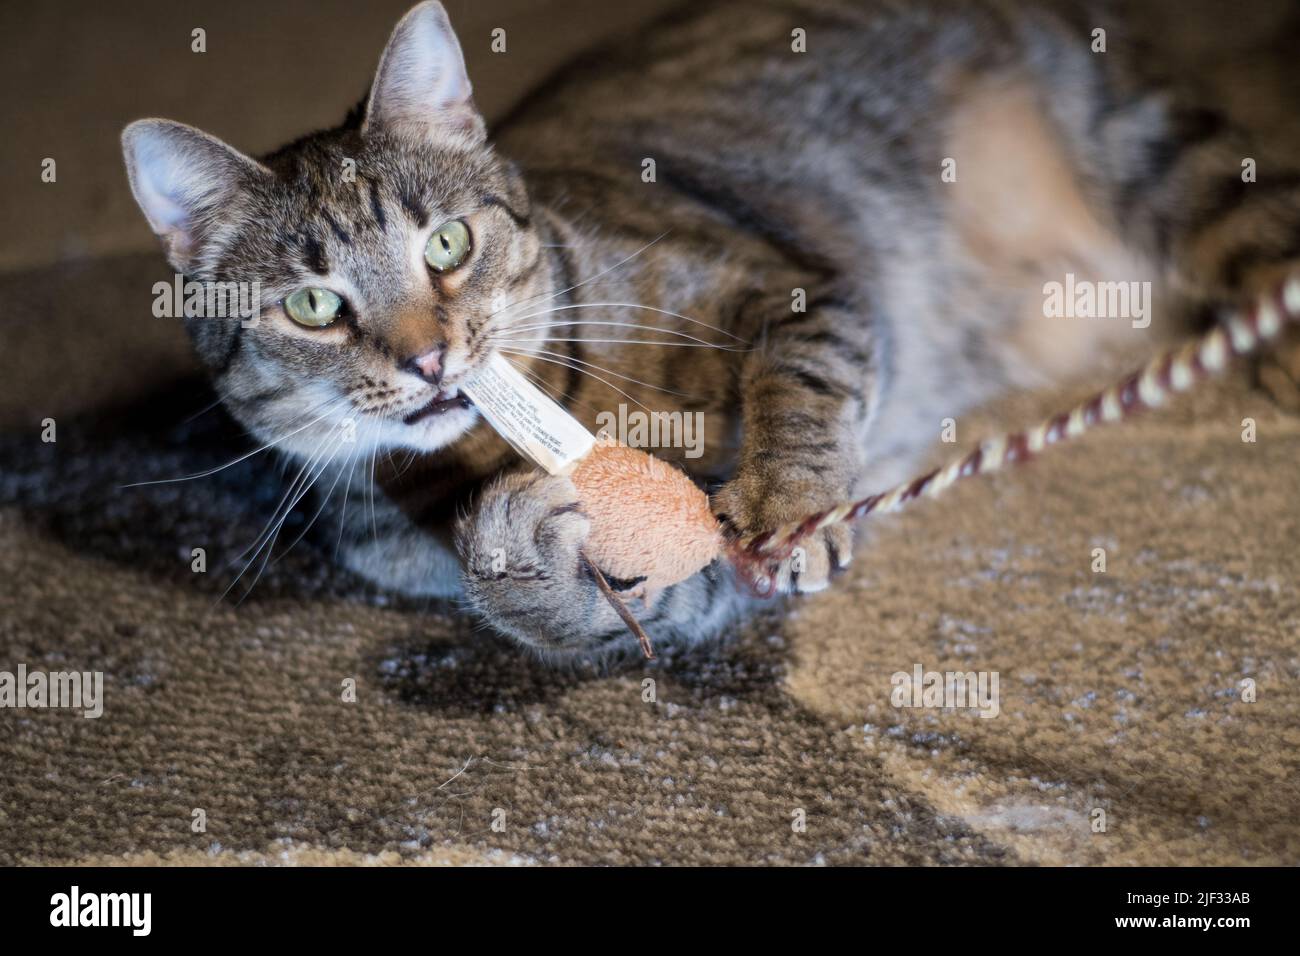 Short haired domestic cat playing with a cat toy Stock Photo